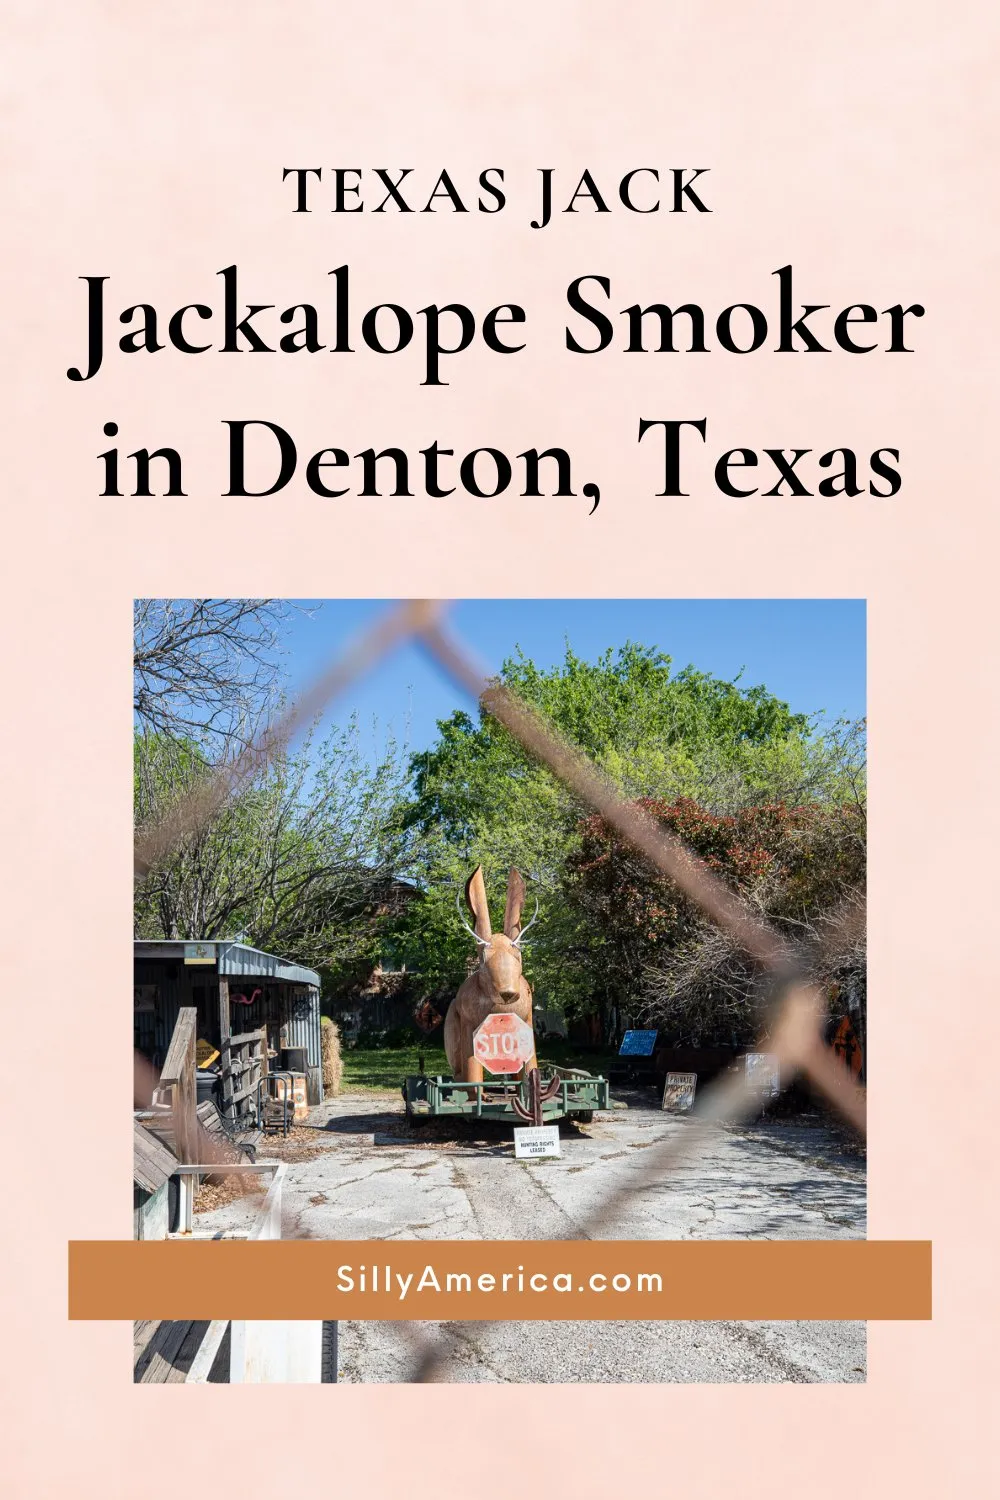 A Texas legend meets a great Texas pastime at this fun roadside attraction. Meet Texas Jack, a jackalope-shaped smoker in Denton, Texas. Visit this weird roadside attraction on your Texas road trip. The jackalope smoker is a fun stop to add to your travel itinerary! #RoadsideAttraction #RoadsideAttractions #Texas RoadsideAttraction #Texas #DentonTexas #RoadTrip #RoadTrips #TexasRoadTrip #RoadTripStop #RoadTripStops